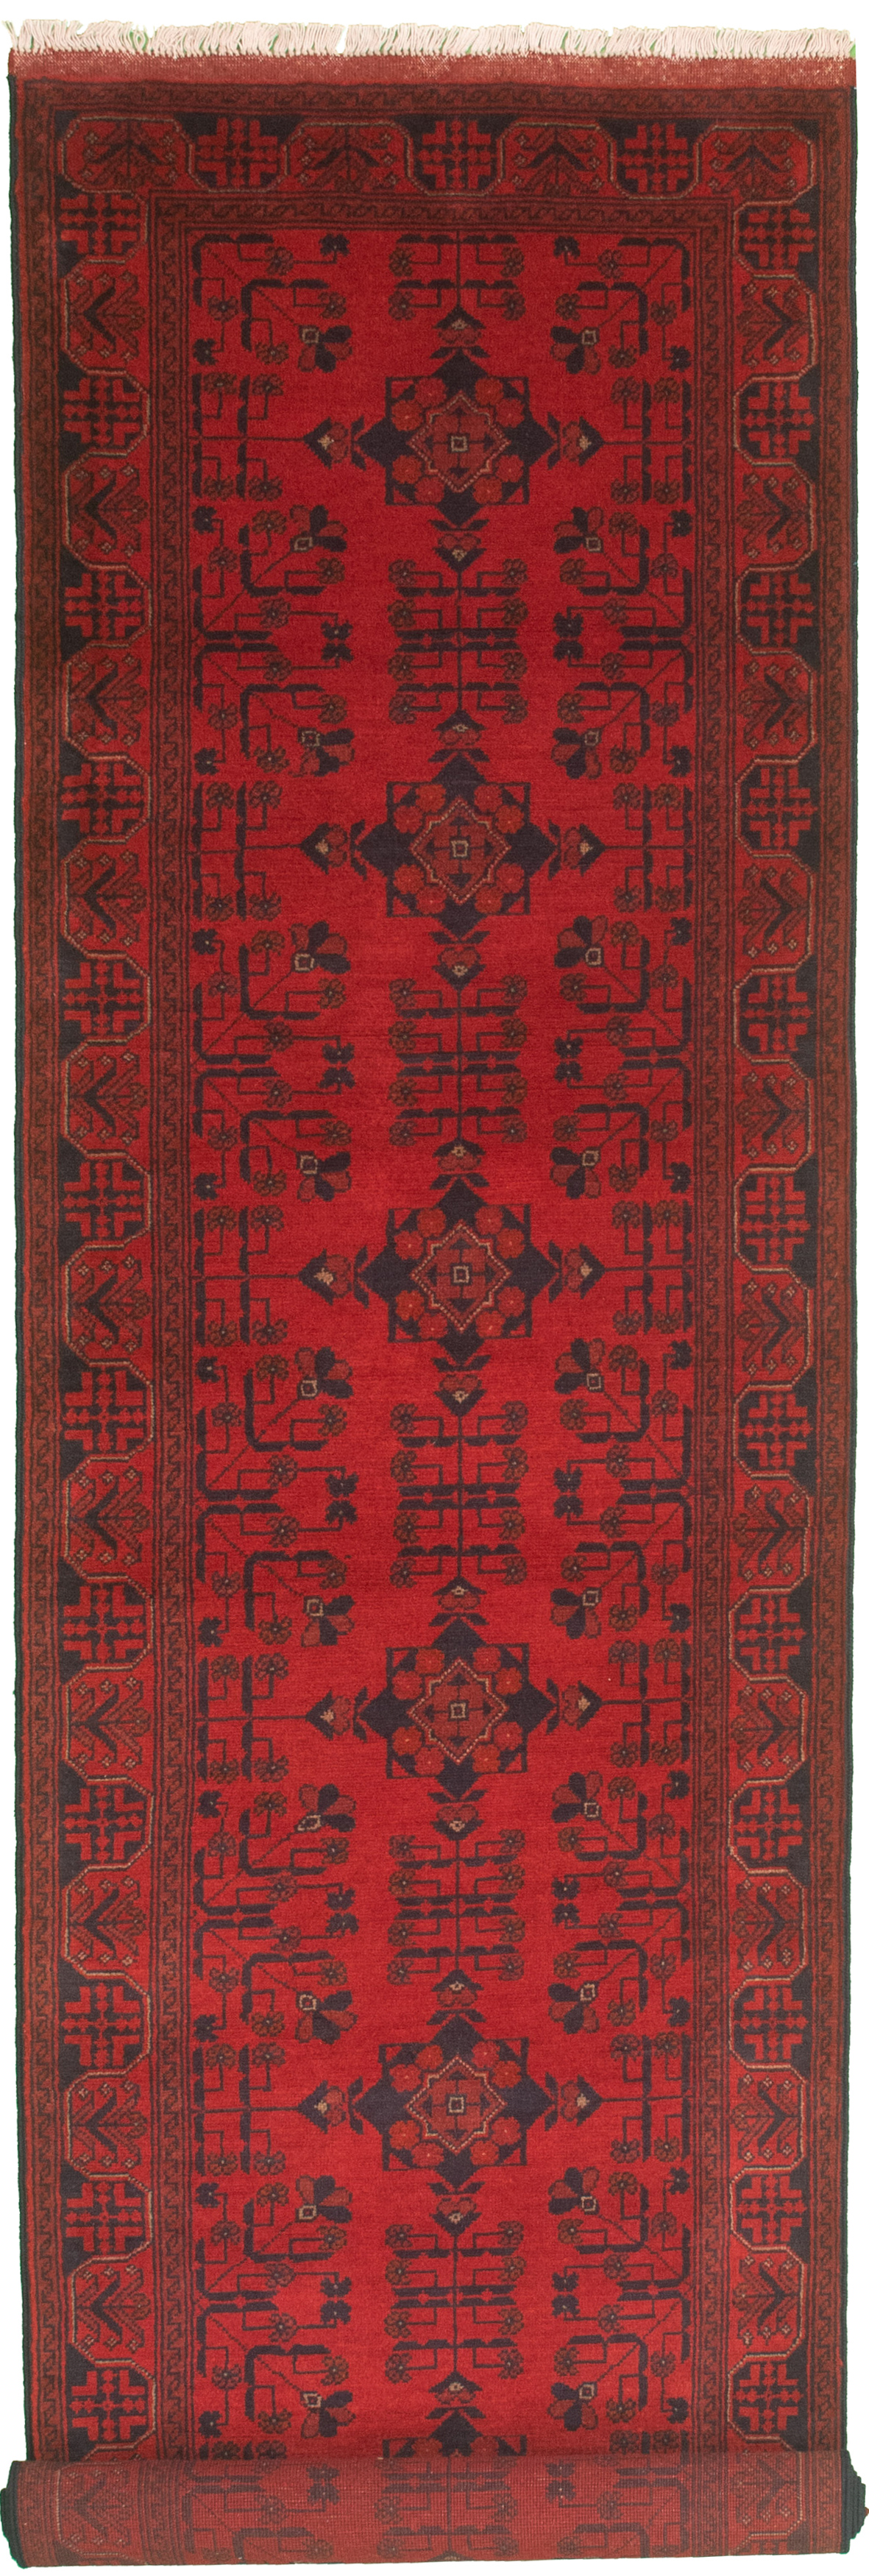 Hand-knotted Finest Khal Mohammadi Red Wool Rug 2'8" x 12'7" Size: 2'8" x 12'7"  